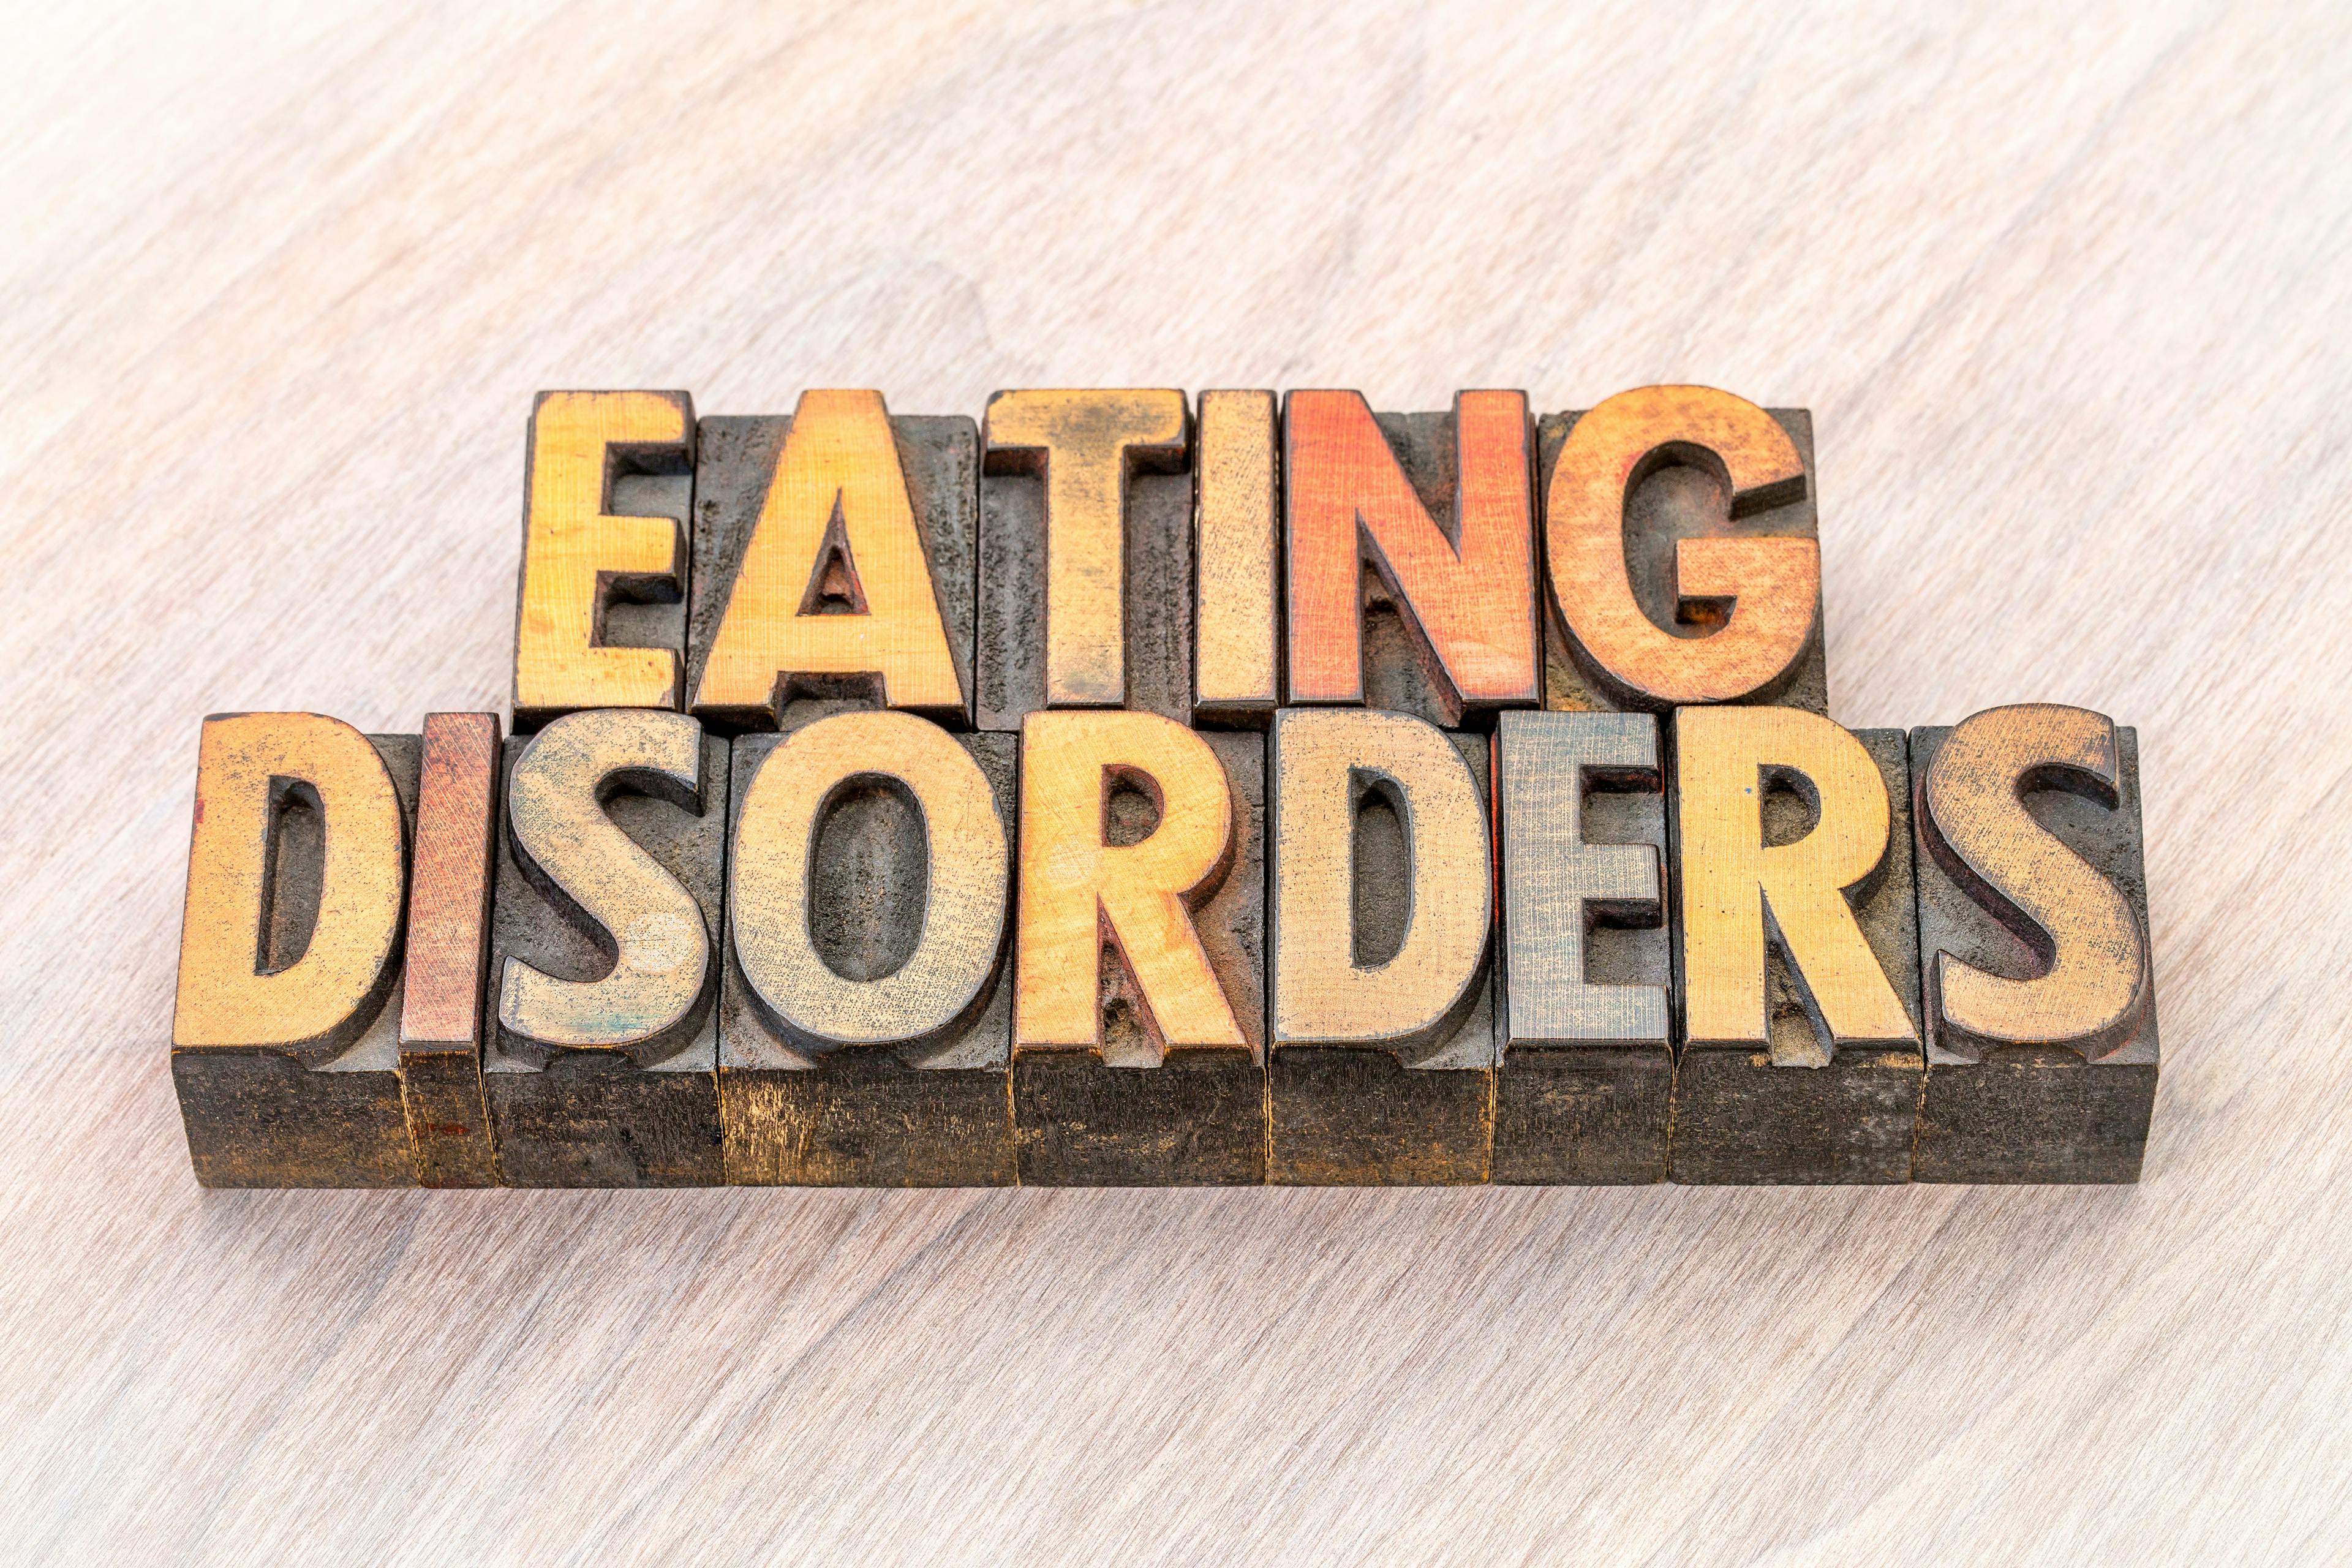 Managing and treating eating disorders |  Image Credit: © MarekPhotoDesign.com - © MarekPhotoDesign.com - stock.adobe.com.